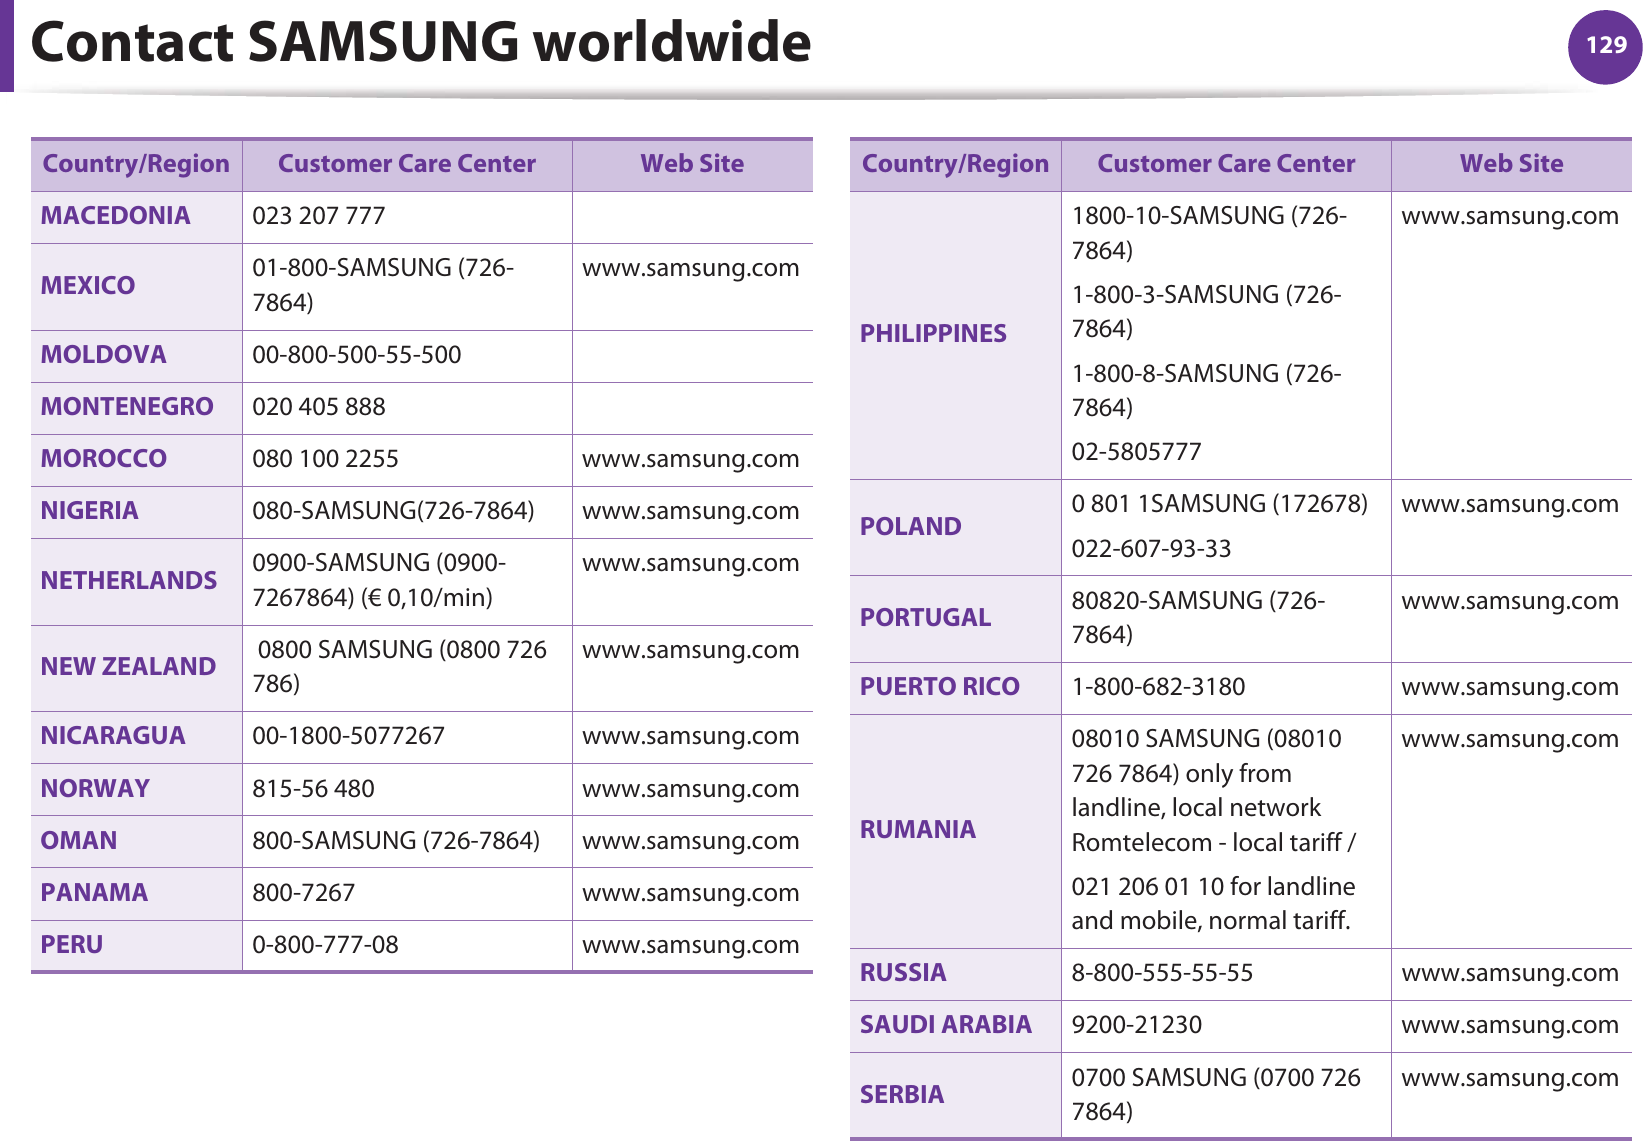 Contact SAMSUNG worldwide 129MACEDONIA 023 207 777MEXICO 01-800-SAMSUNG (726-7864)www.samsung.comMOLDOVA 00-800-500-55-500MONTENEGRO 020 405 888MOROCCO 080 100 2255 www.samsung.comNIGERIA 080-SAMSUNG(726-7864) www.samsung.comNETHERLANDS 0900-SAMSUNG (0900-7267864) (€ 0,10/min)www.samsung.comNEW ZEALAND  0800 SAMSUNG (0800 726 786)www.samsung.comNICARAGUA 00-1800-5077267 www.samsung.comNORWAY 815-56 480 www.samsung.comOMAN 800-SAMSUNG (726-7864) www.samsung.comPANAMA 800-7267 www.samsung.comPERU 0-800-777-08 www.samsung.comCountry/Region Customer Care Center  Web SitePHILIPPINES1800-10-SAMSUNG (726-7864)1-800-3-SAMSUNG (726-7864)1-800-8-SAMSUNG (726-7864)02-5805777www.samsung.comPOLAND 0 801 1SAMSUNG (172678)022-607-93-33www.samsung.comPORTUGAL 80820-SAMSUNG (726-7864)www.samsung.comPUERTO RICO 1-800-682-3180 www.samsung.comRUMANIA08010 SAMSUNG (08010 726 7864) only from landline, local network Romtelecom - local tariff /021 206 01 10 for landline and mobile, normal tariff.www.samsung.comRUSSIA 8-800-555-55-55 www.samsung.comSAUDI ARABIA 9200-21230 www.samsung.comSERBIA 0700 SAMSUNG (0700 726 7864)www.samsung.comCountry/Region Customer Care Center  Web Site